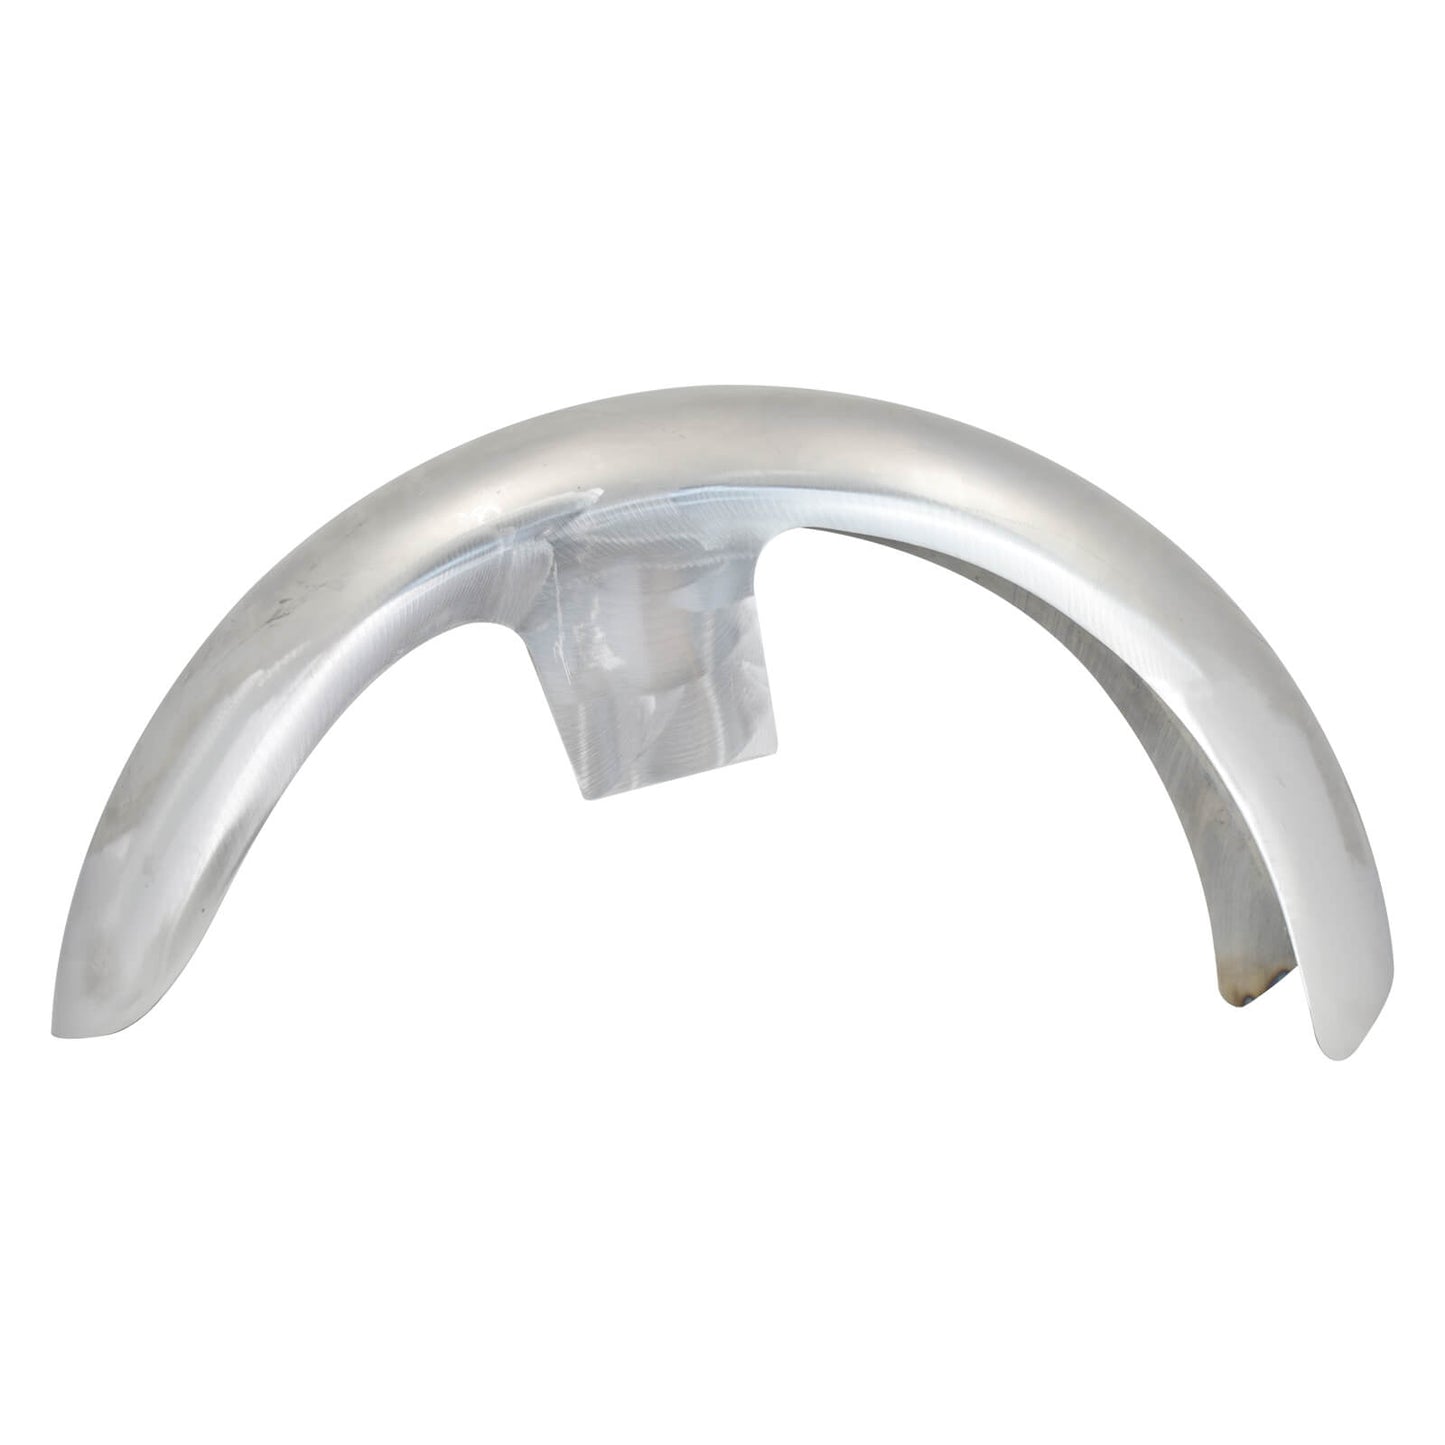 Mactions-unpainted-21inches-mudguards-CR026409